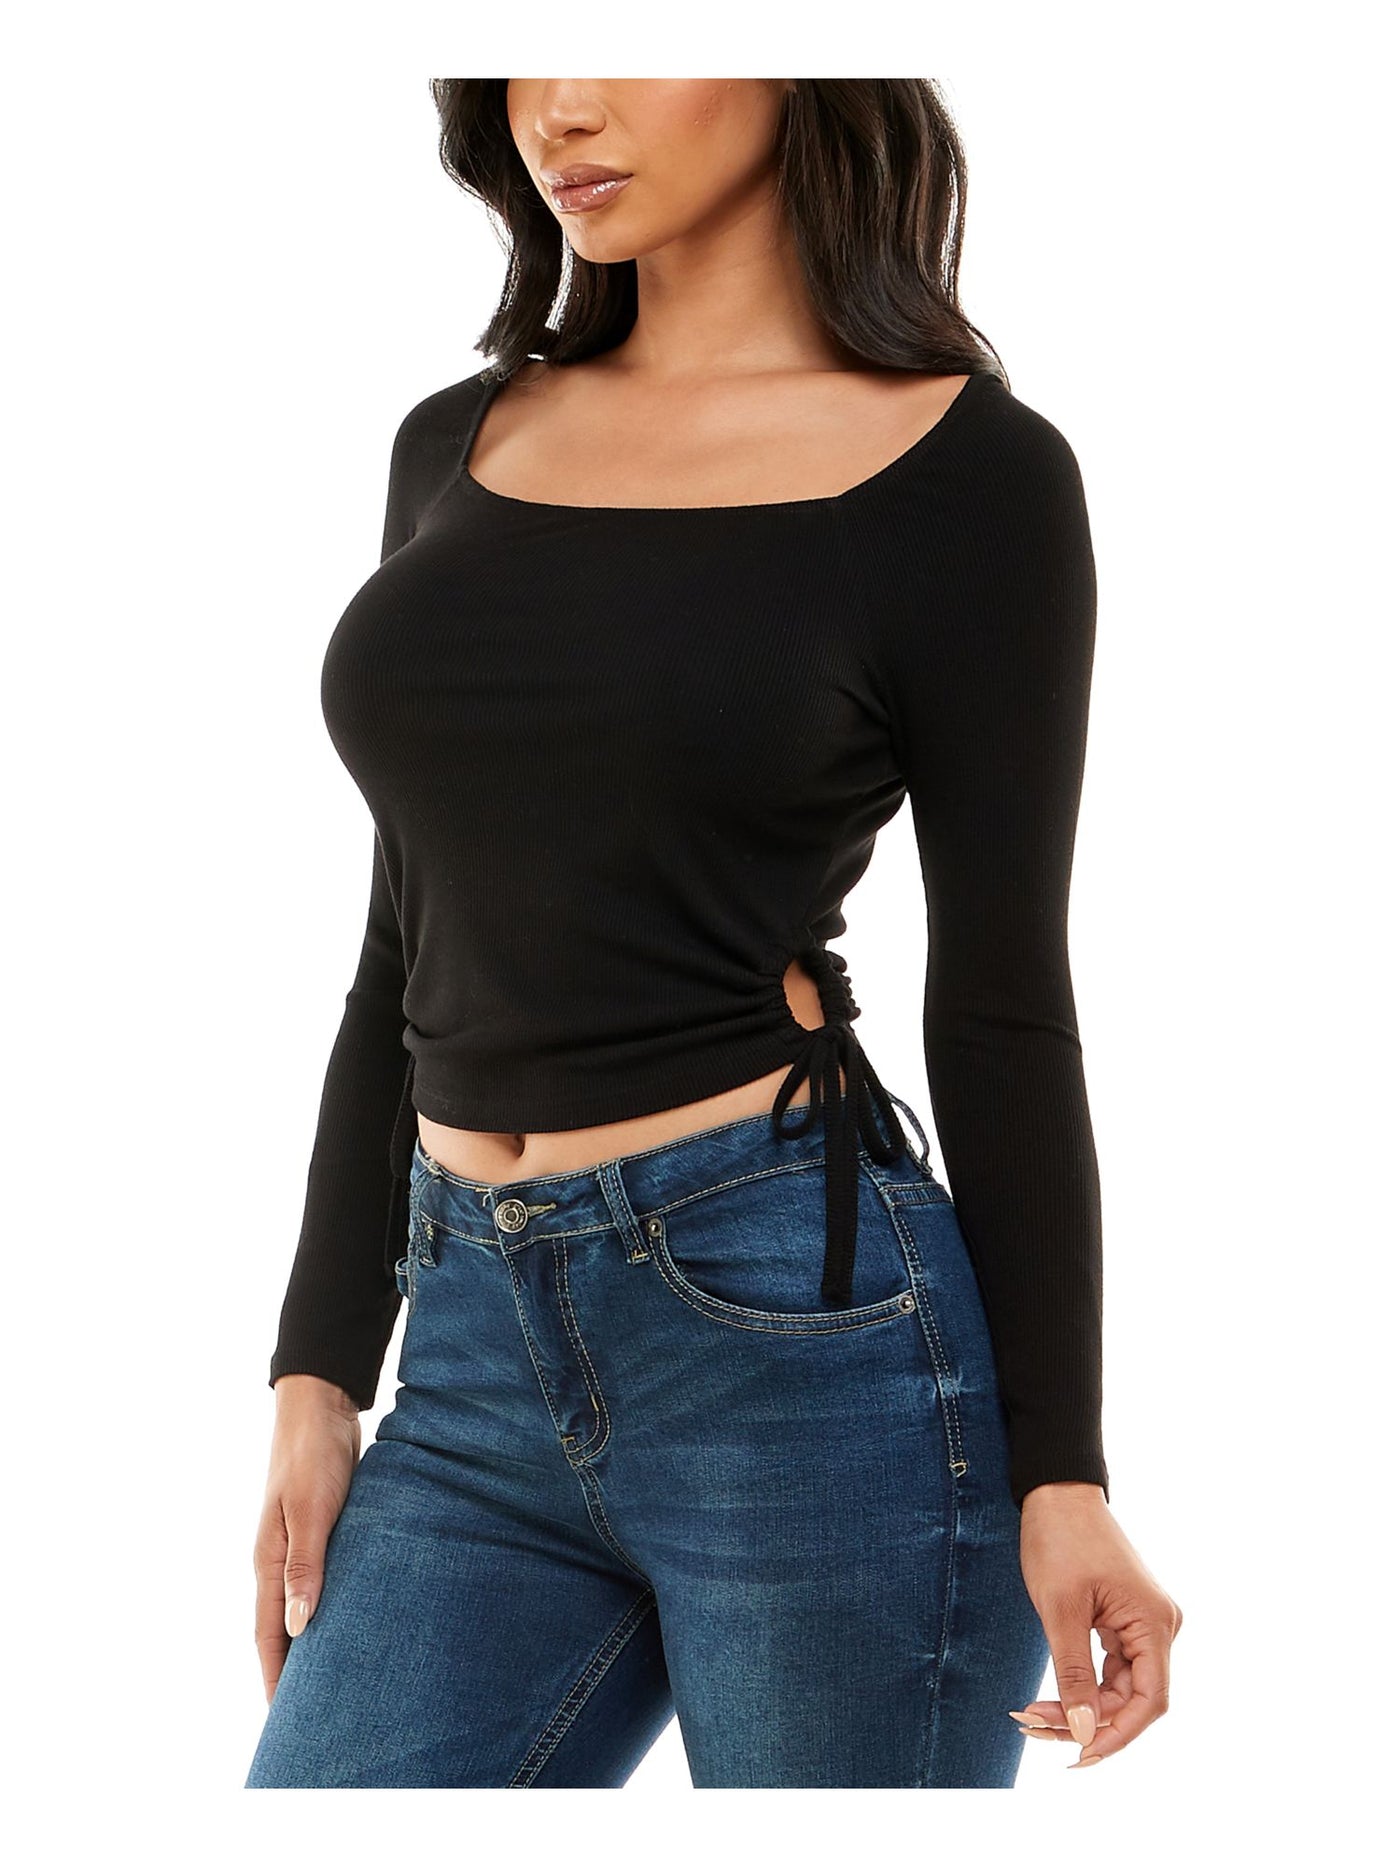 CRAVE FAME Womens Black Ruched Cut Out Side Ties Ribbed Fitted Long Sleeve Square Neck Crop Top Juniors M